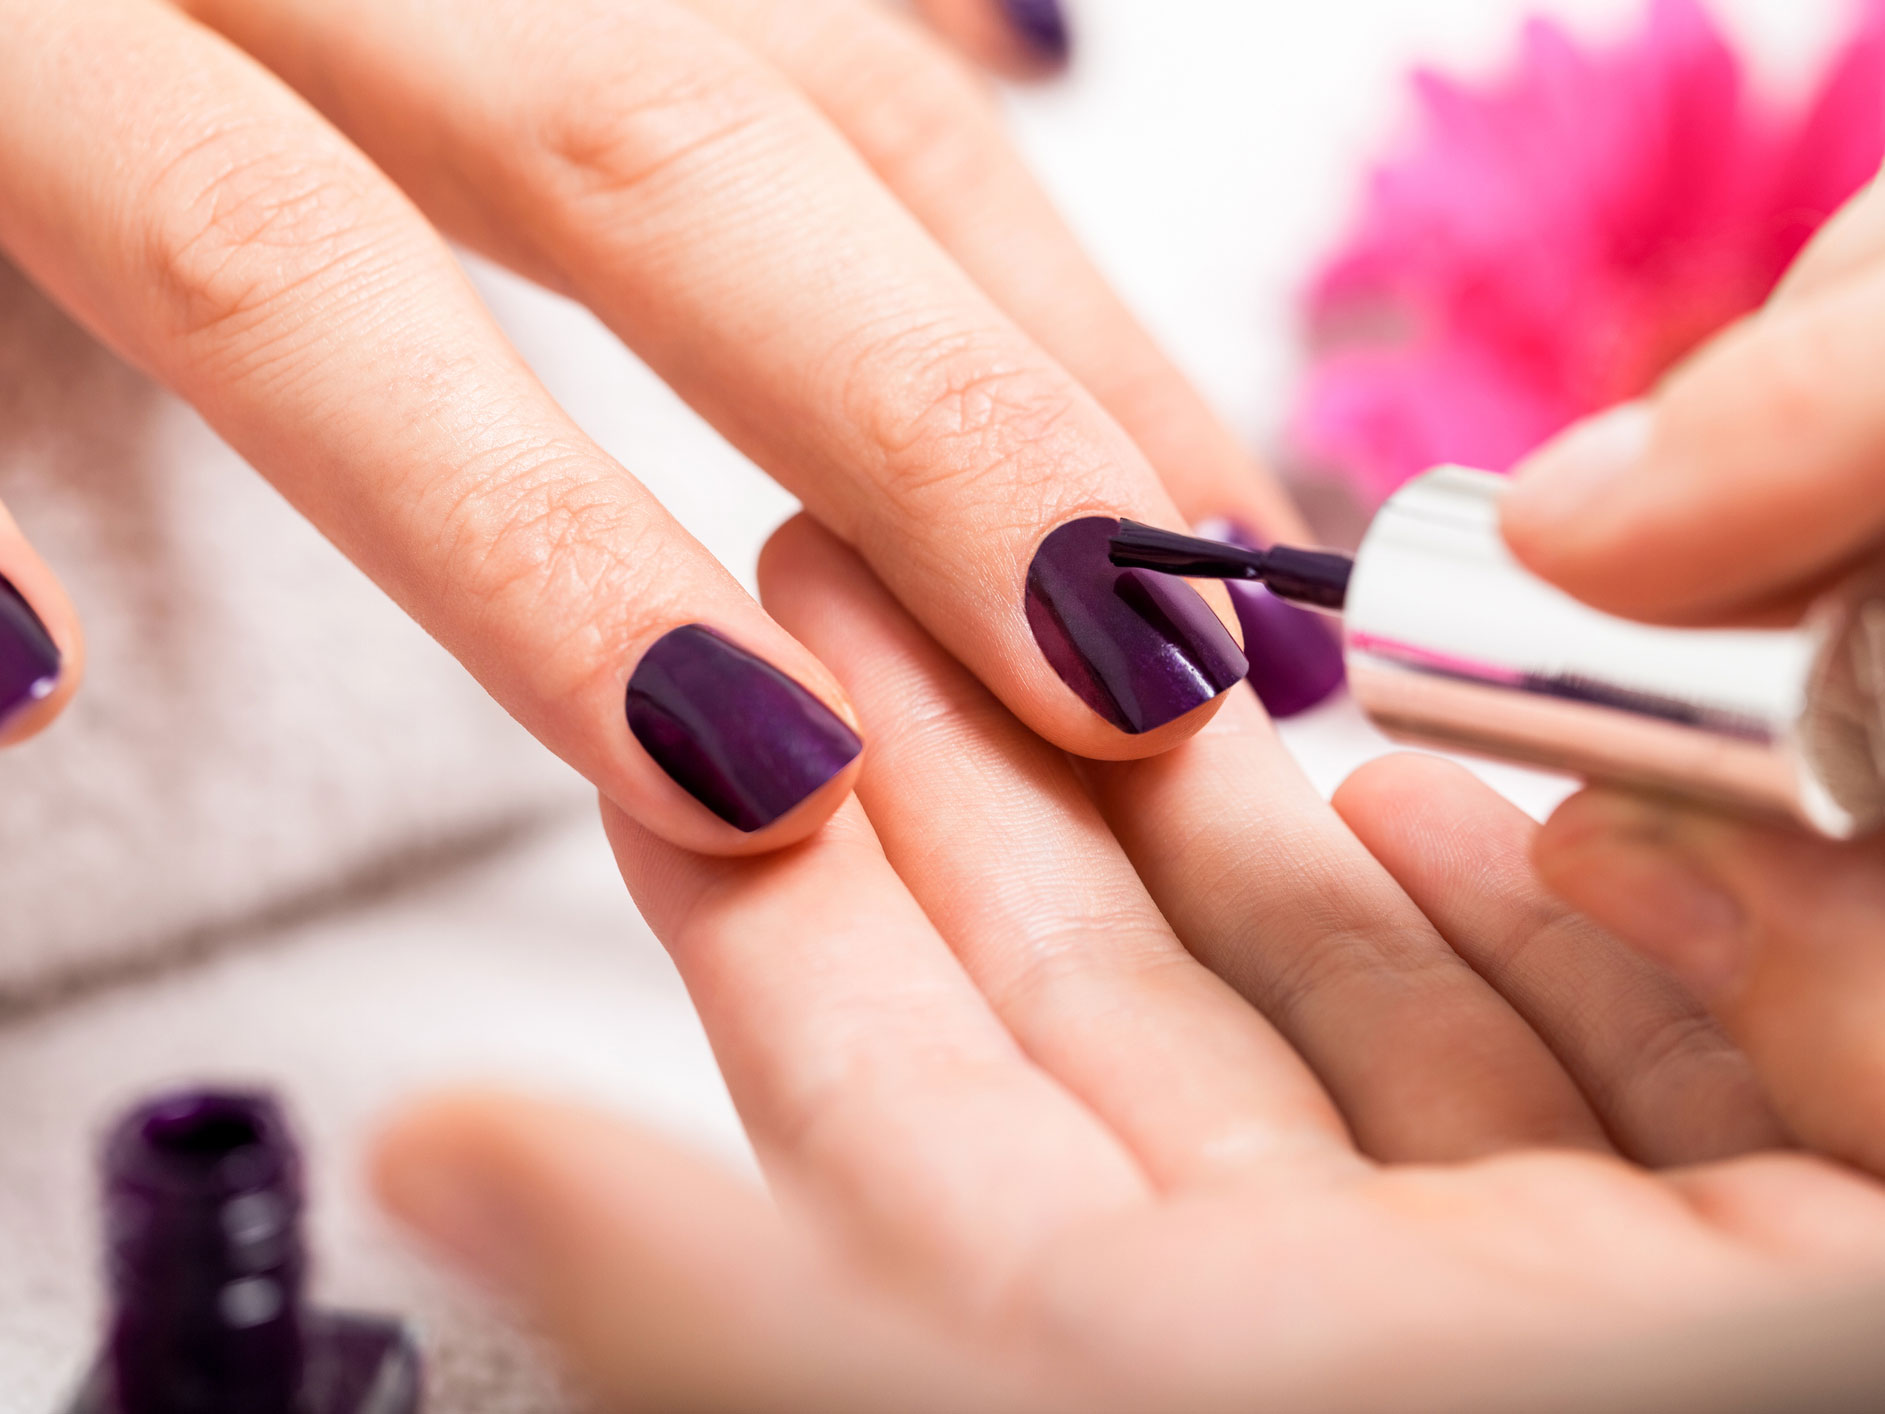 3 dangerous chemicals in nail polish - Easy Health Options®